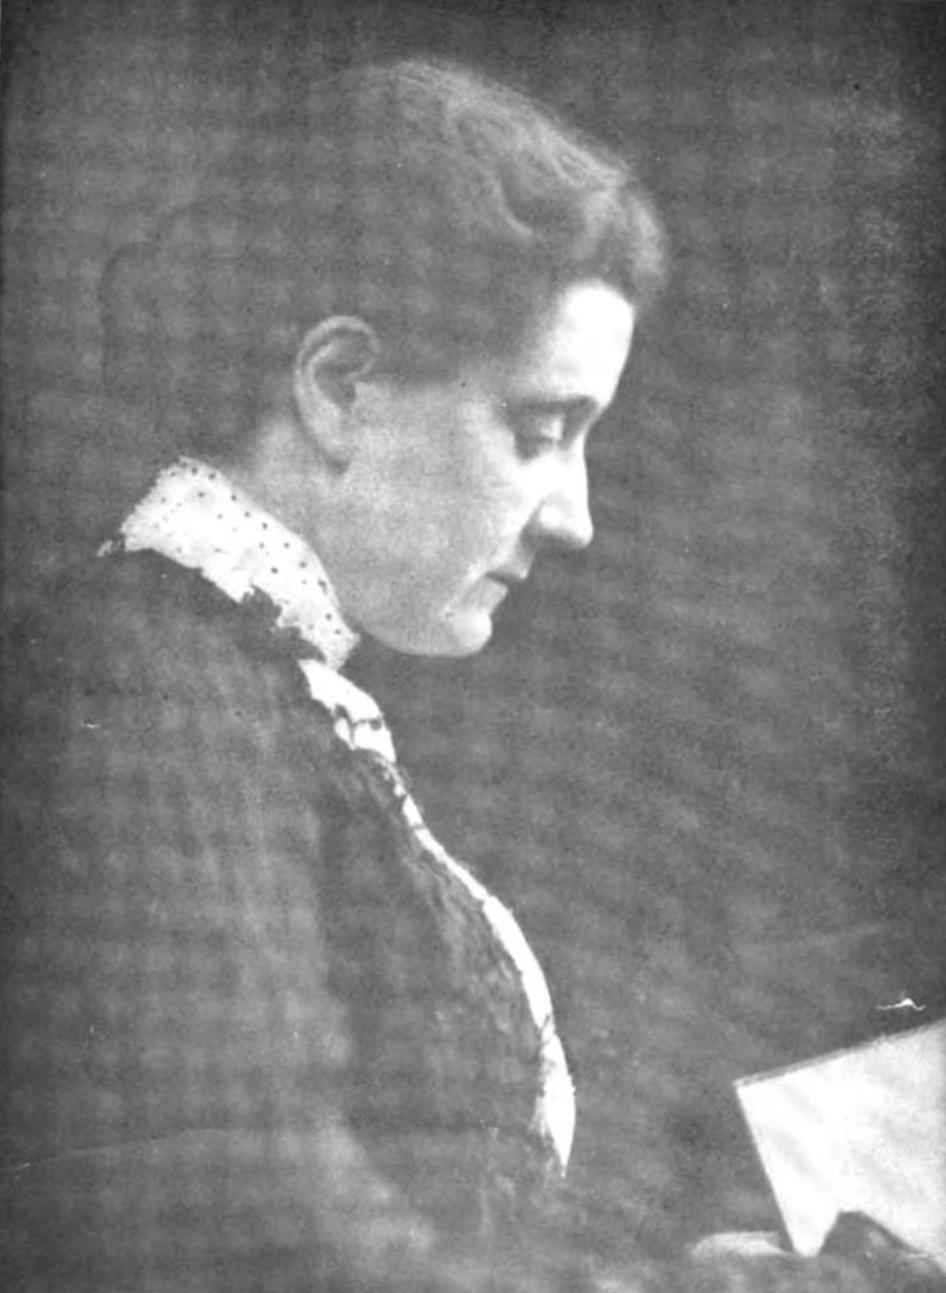 A photographic portrait of Jane Addams.